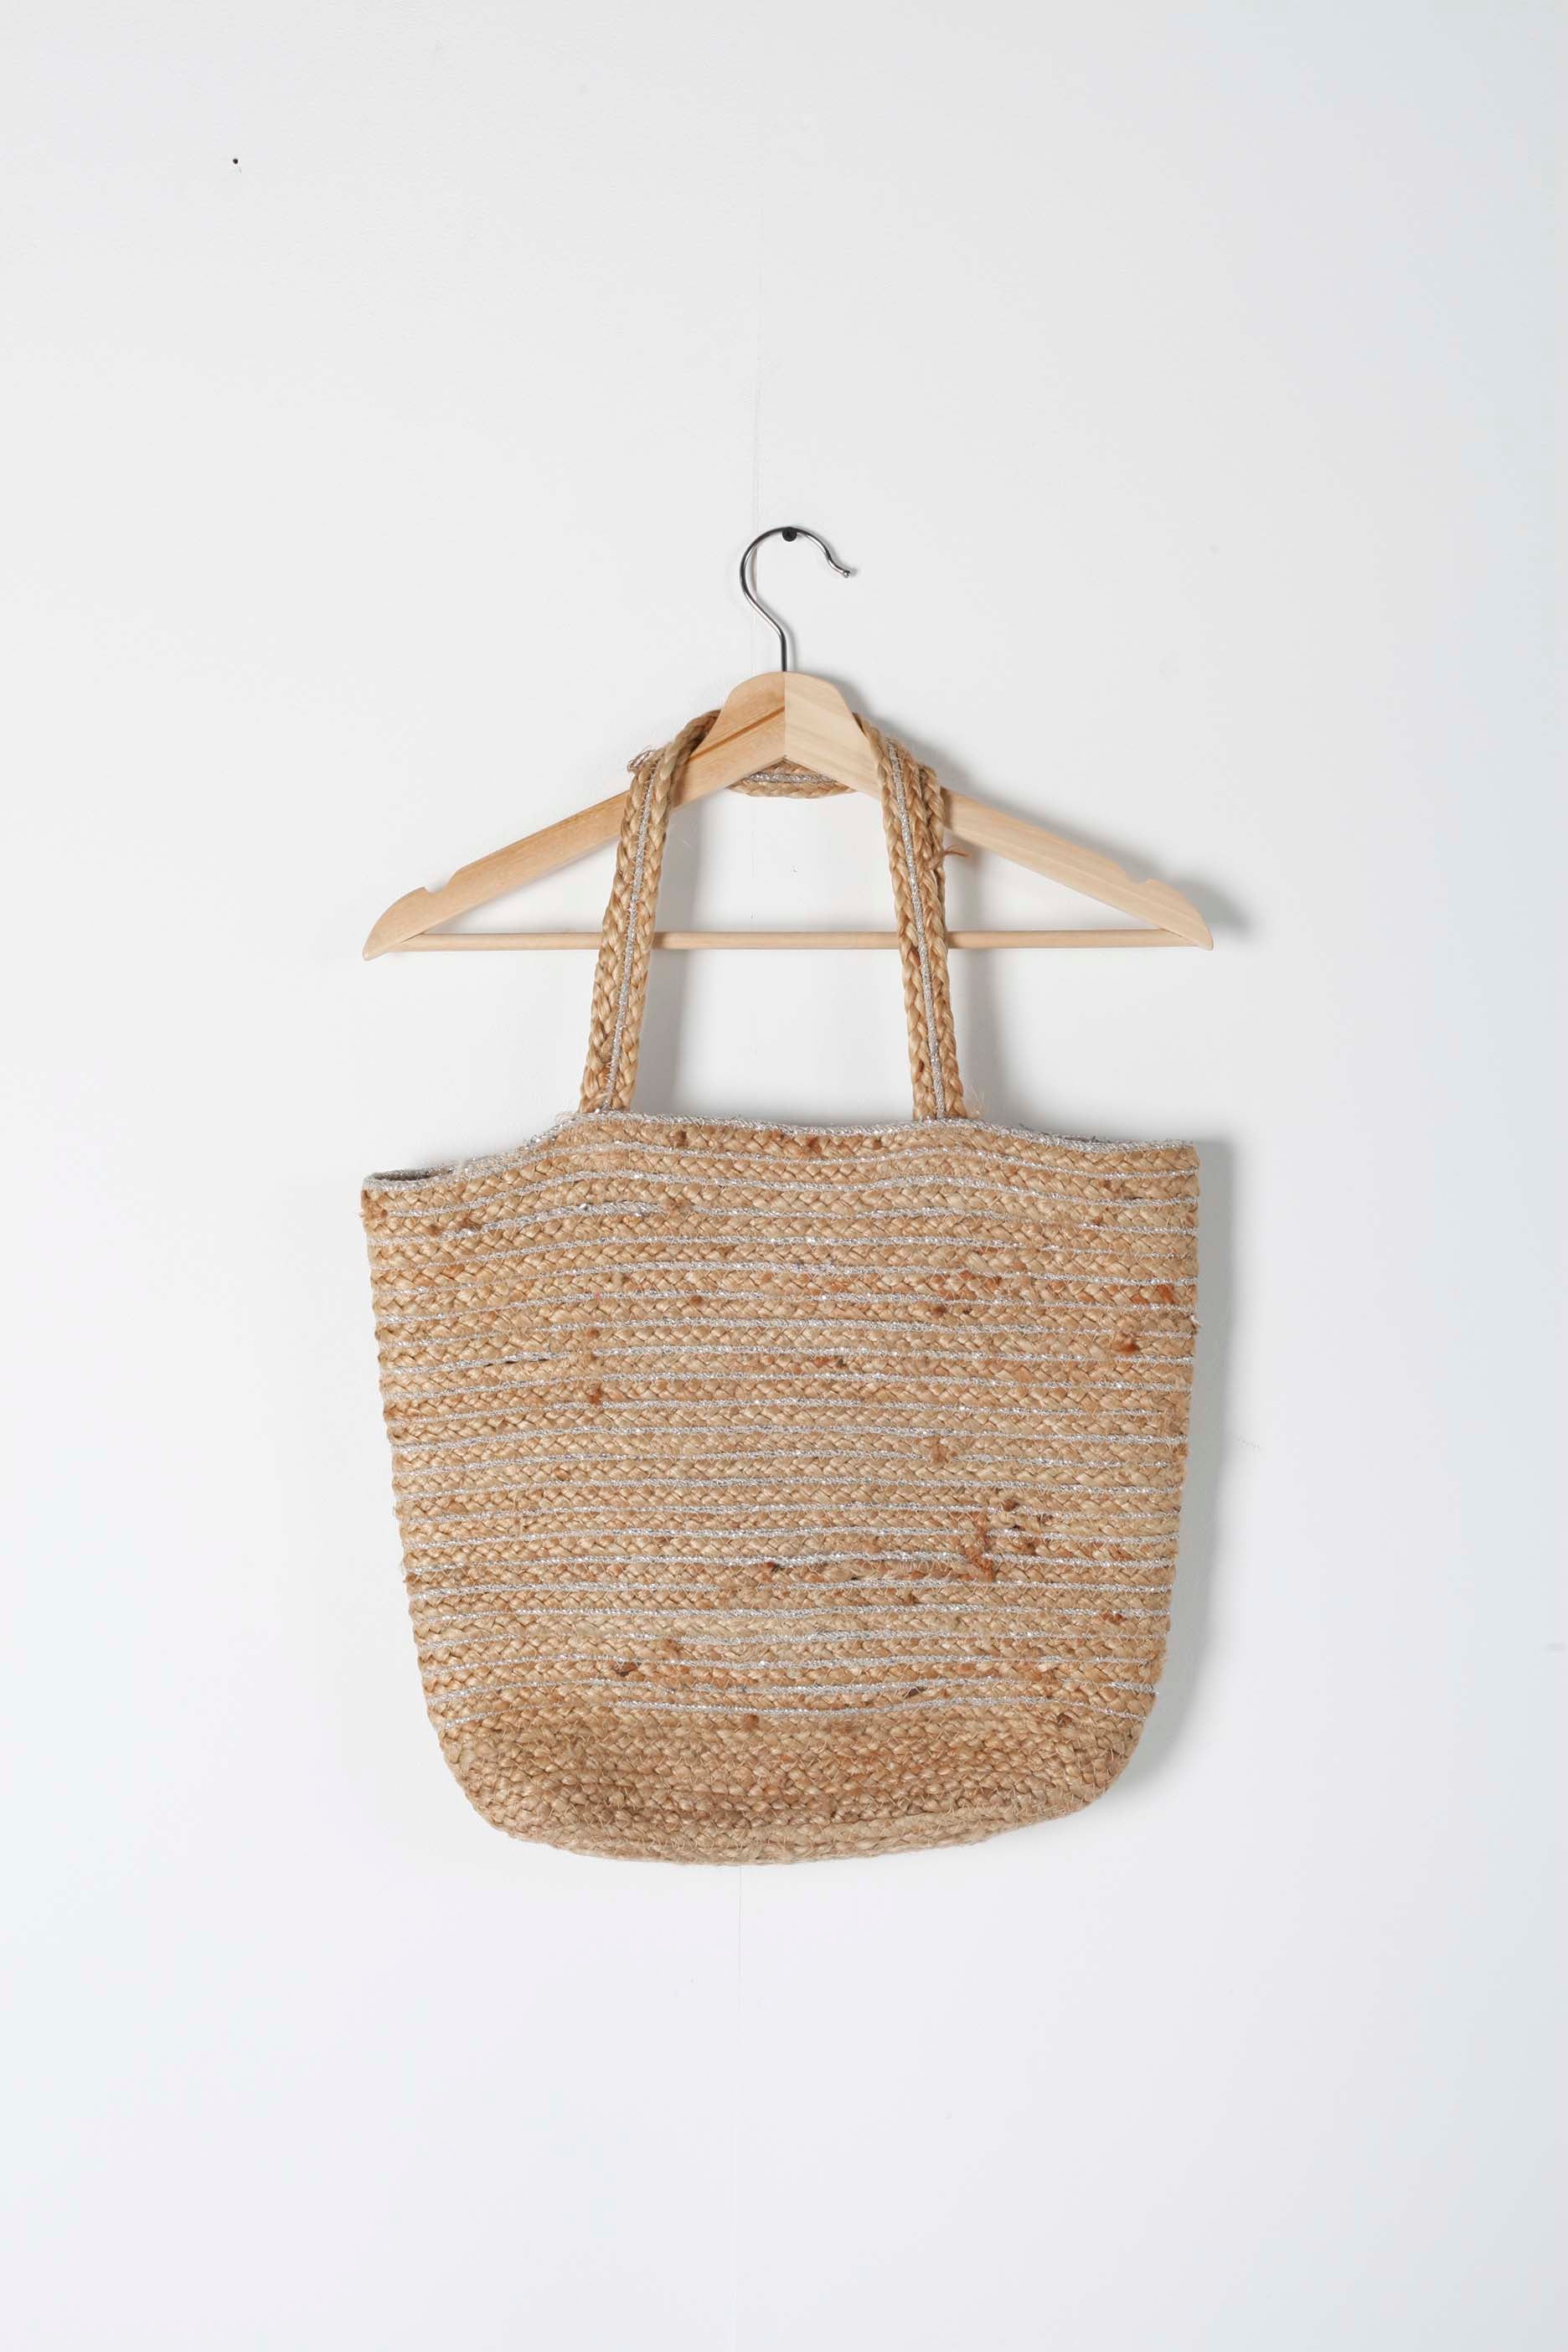 Woven Straw Bag with Metallic Threads